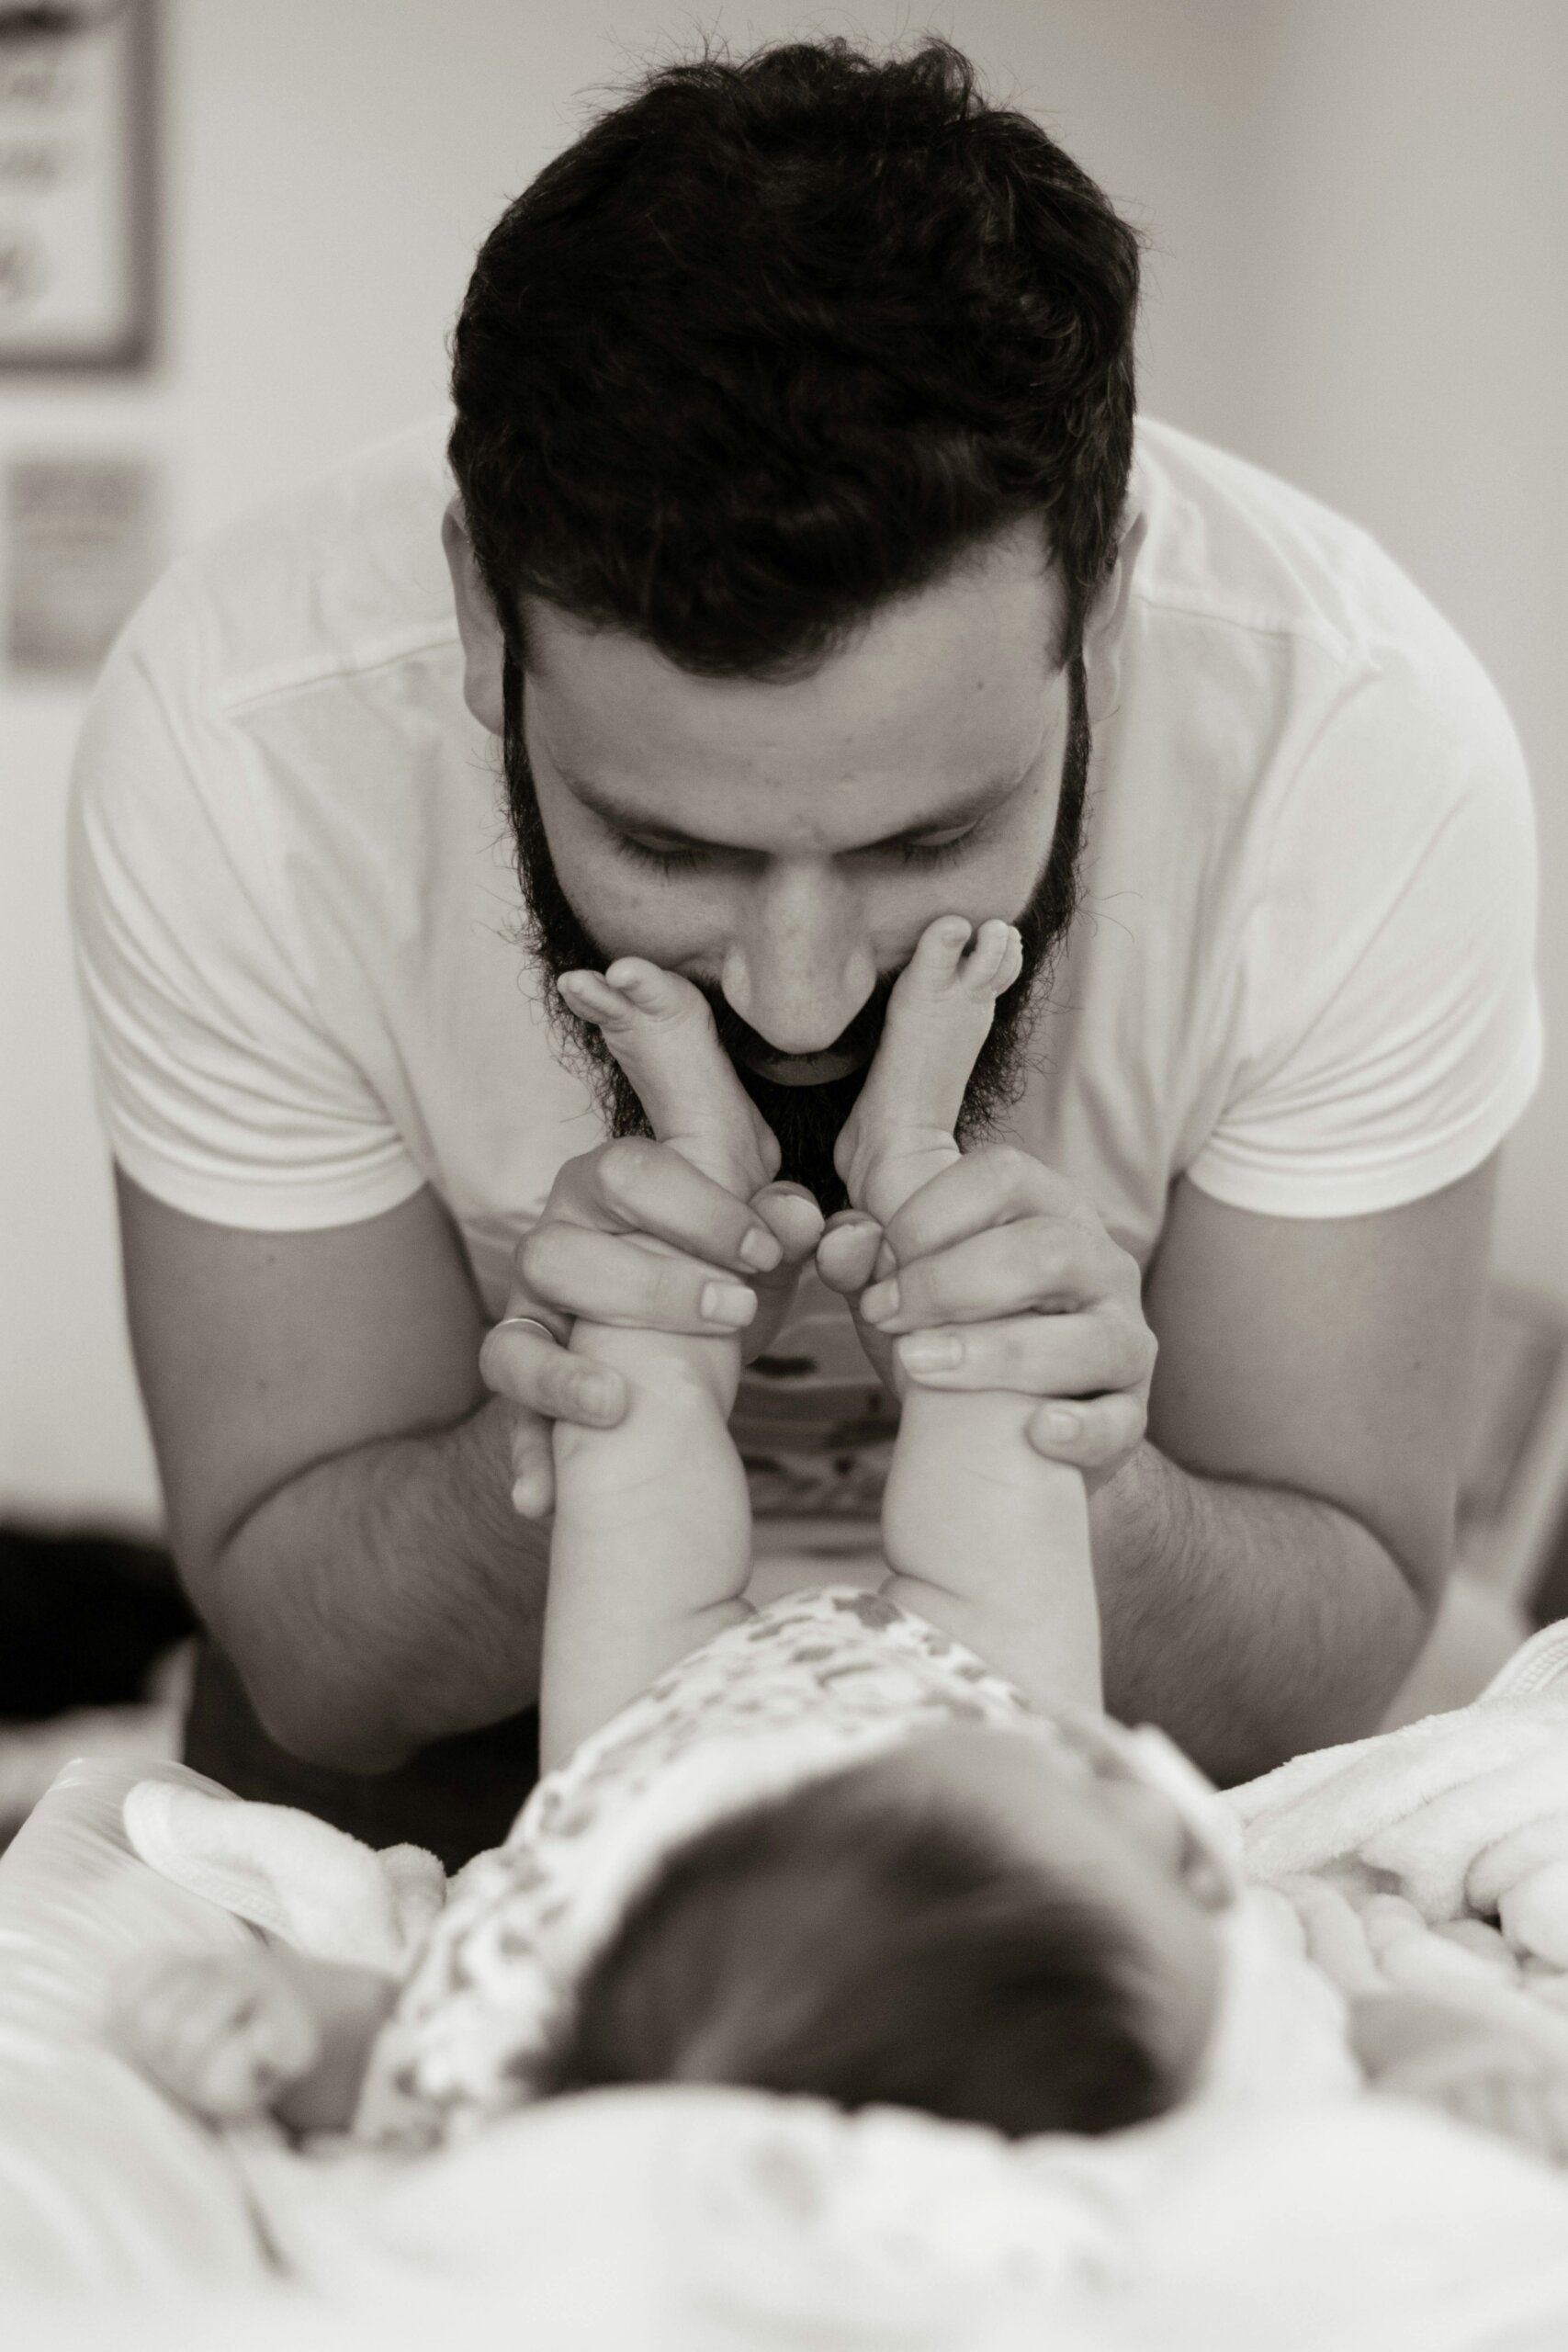 Tips For Men to Cope With Postnatal Depression